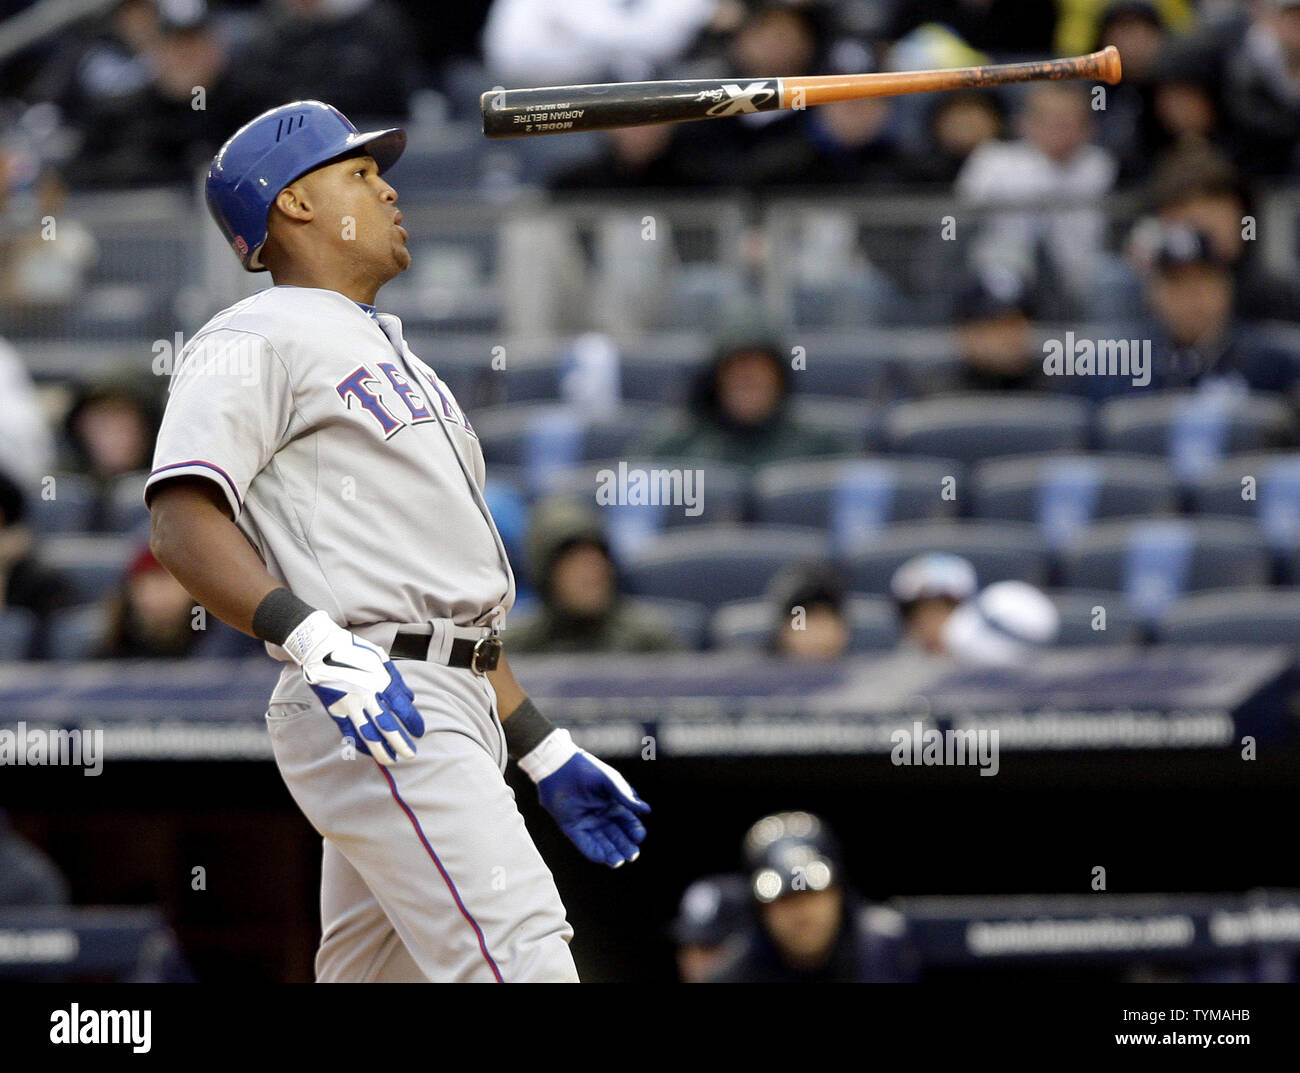 Texas Rangers Adrian Beltre throws his bat while at the plate in the eighth inning against the New York Yankees at Yankee Stadium in New York City on April 16, 2011.       UPI/John Angelillo Stock Photo